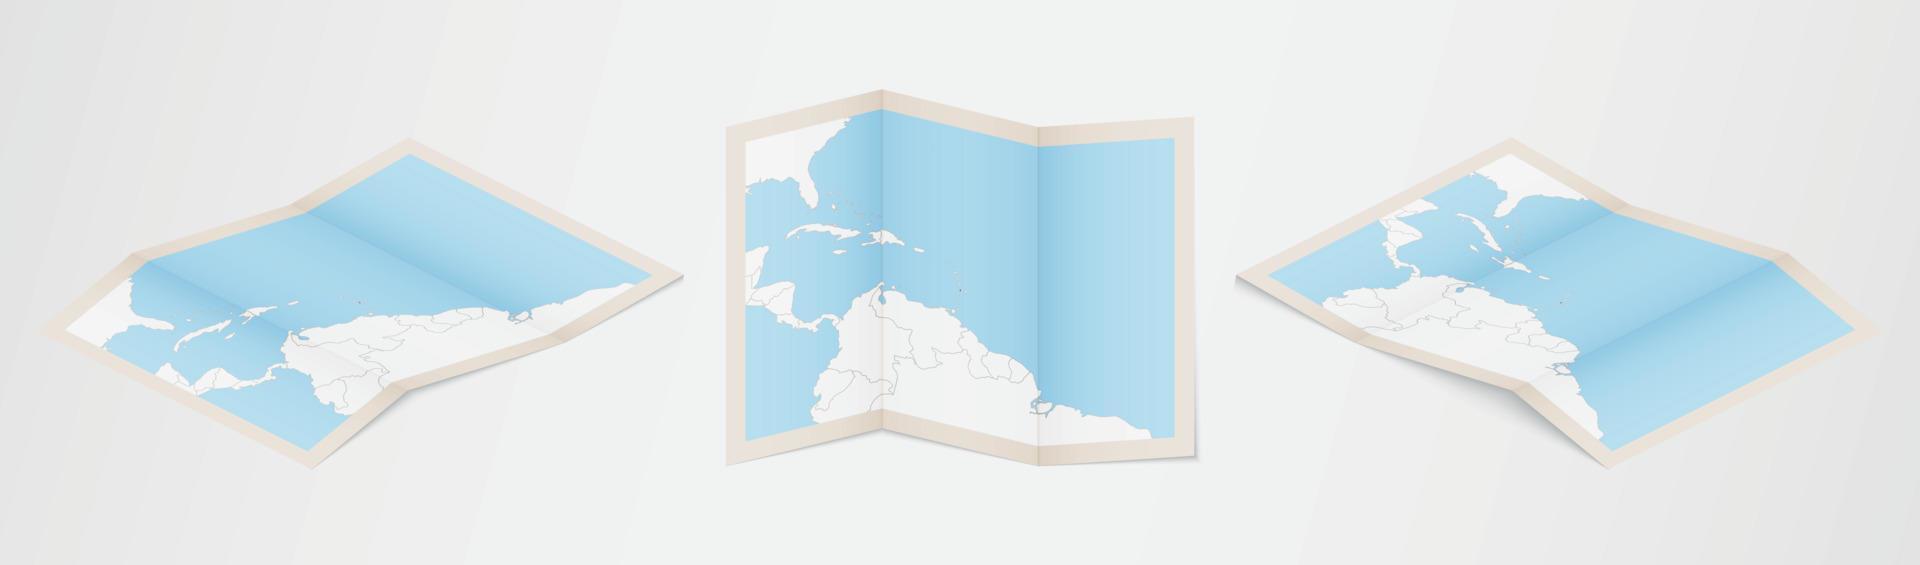 Folded map of Saint Lucia in three different versions. vector